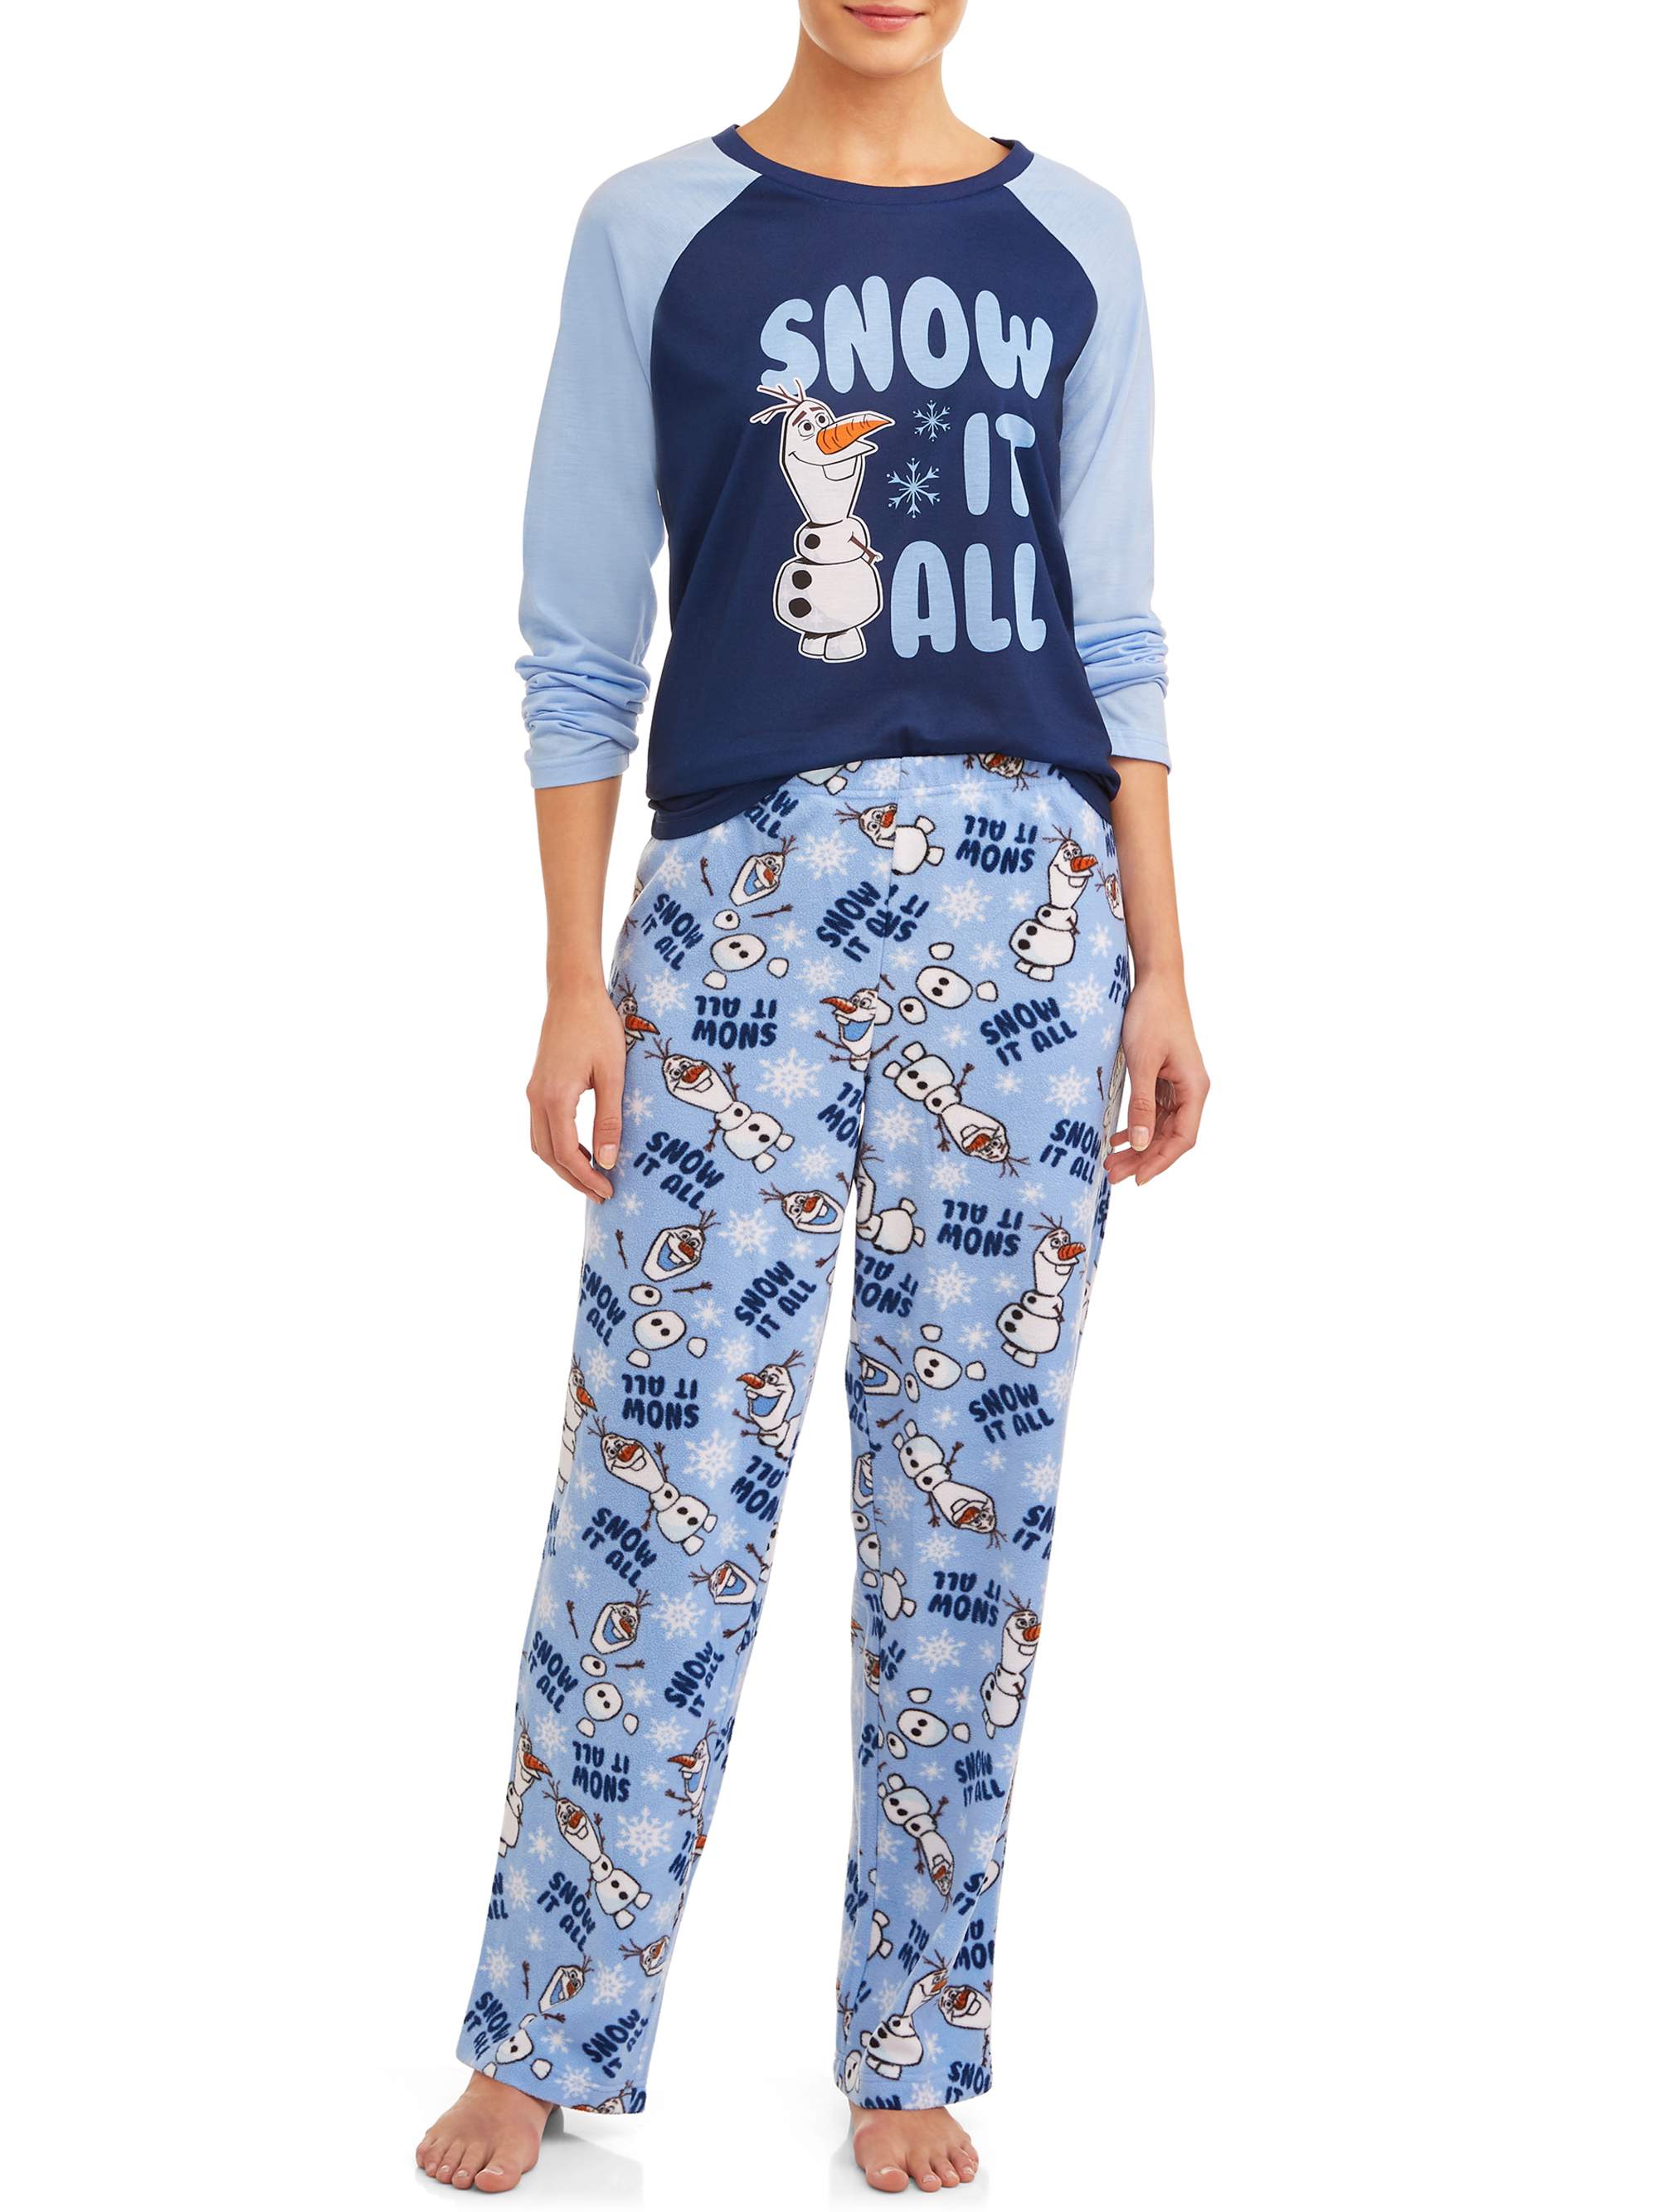 New Disney Pajamas Found At Walmart That Are Cute and Affordable